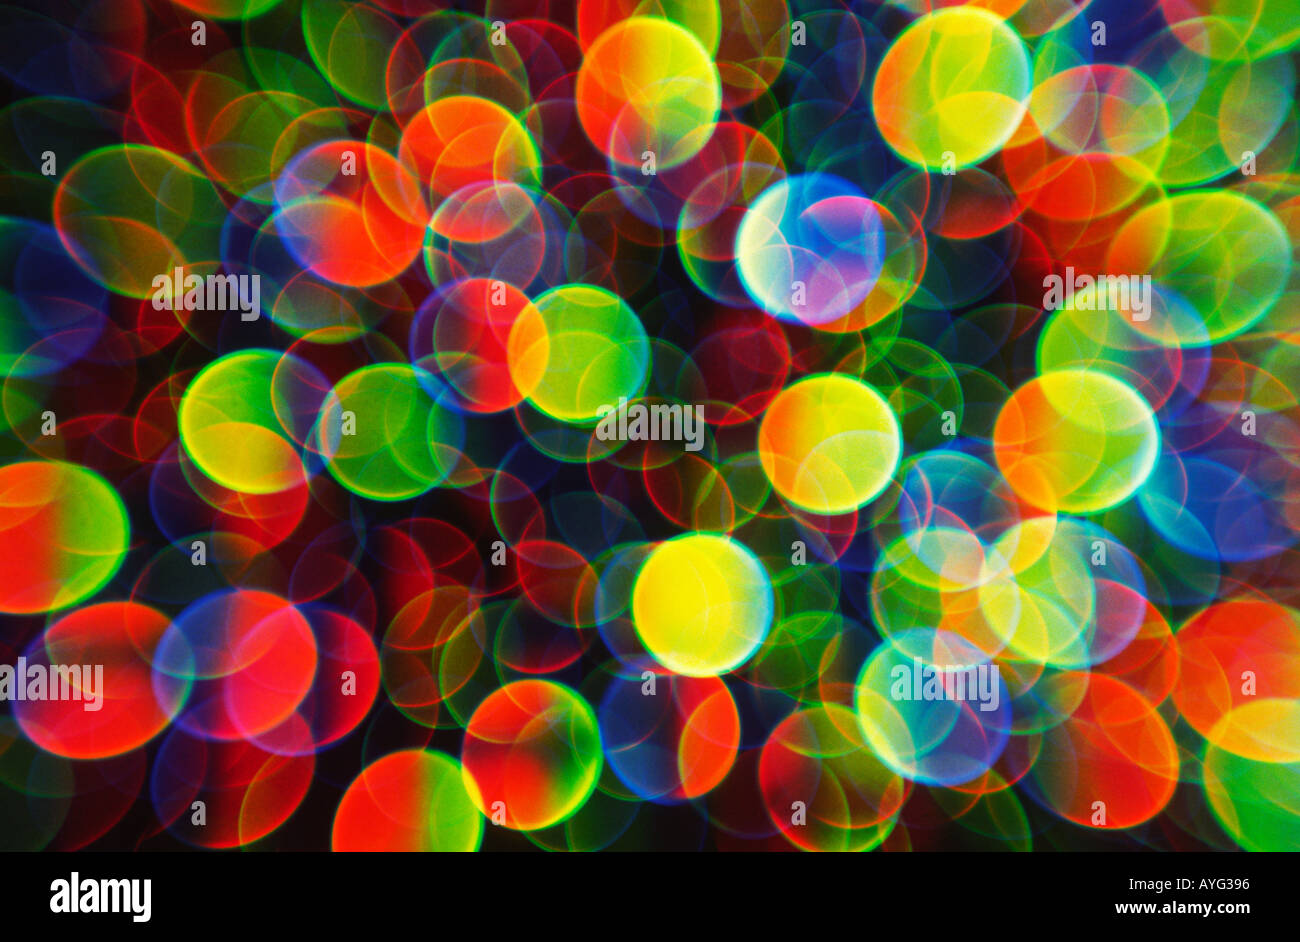 Spheres of light in an abstract multicoloured light pattern Stock Photo ...